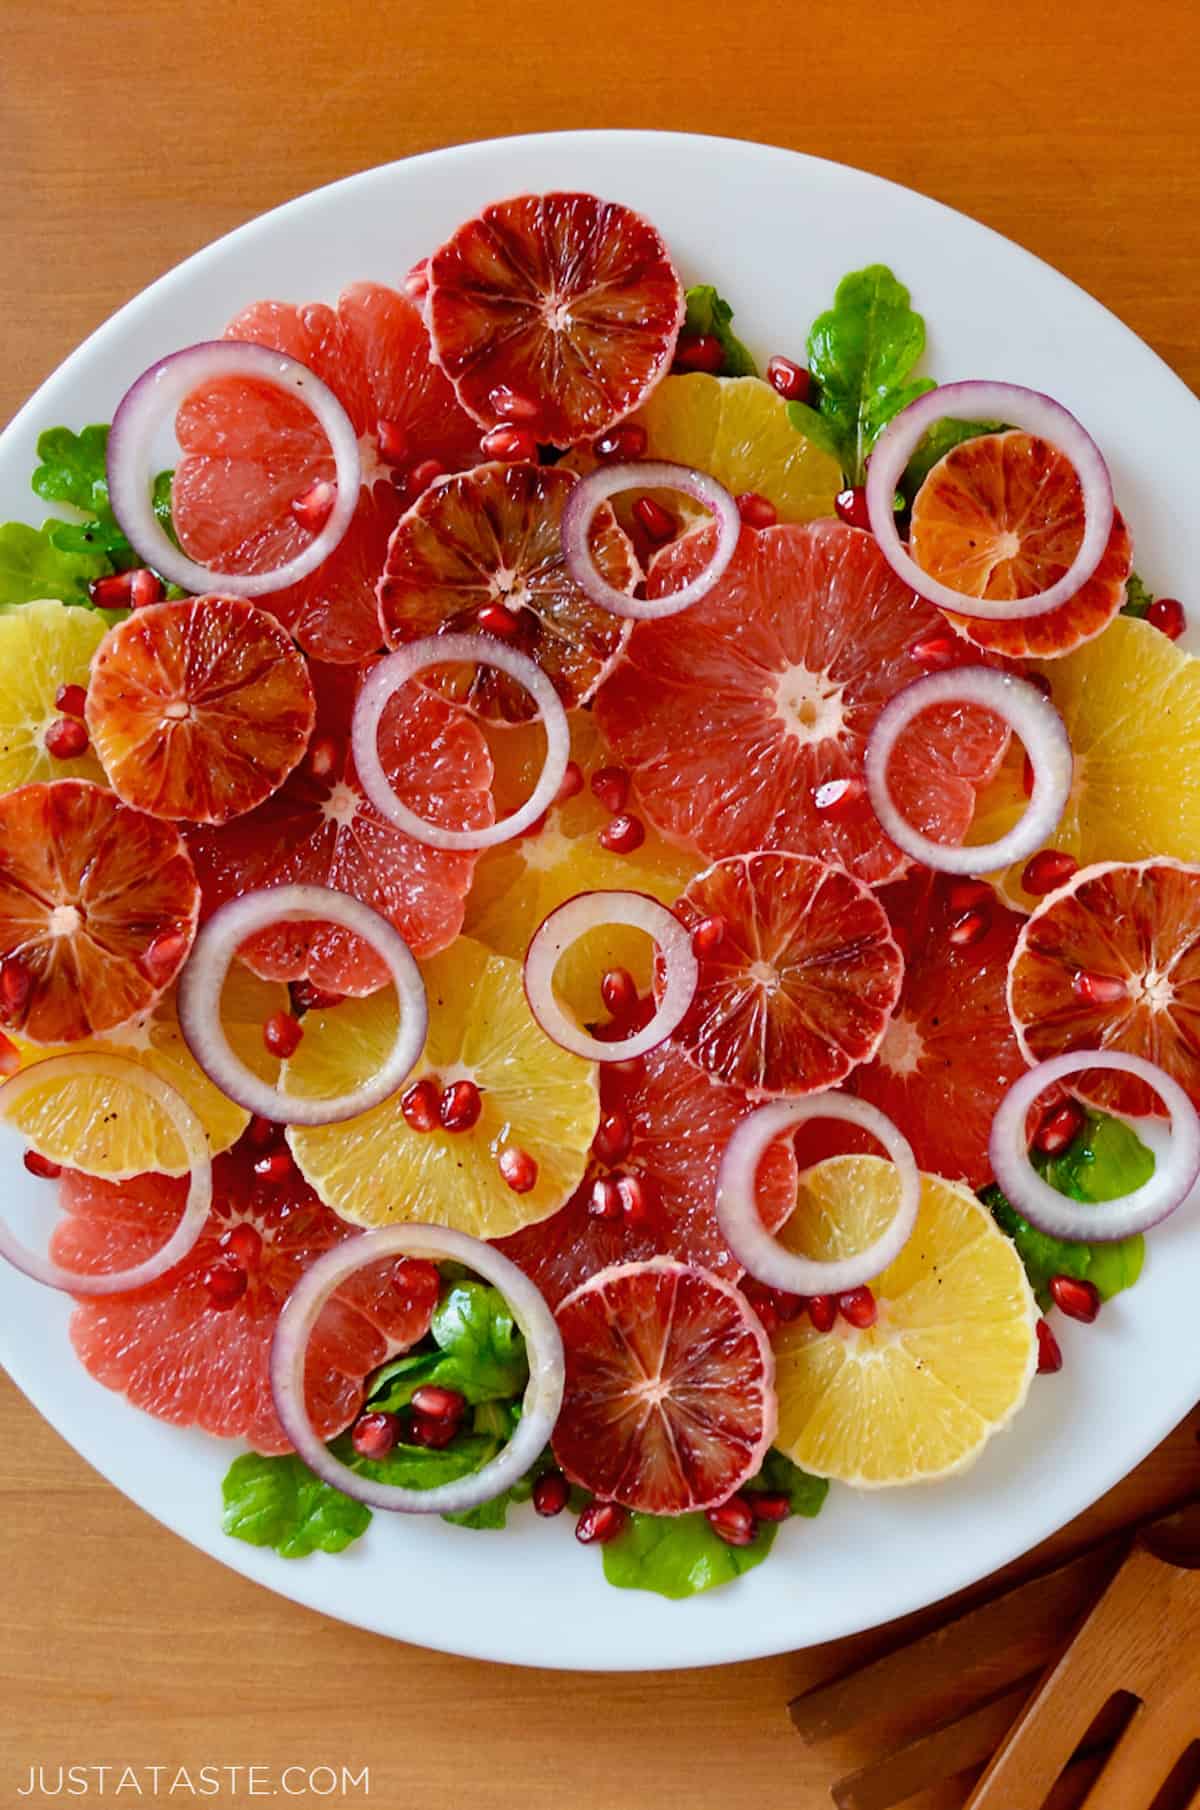 A salad comprised of sliced oranges, blood oranges and grapefruits, red onion slices, arugula and pomegranate seeds on a white serving platter. Salad tongs sit beside the platter.